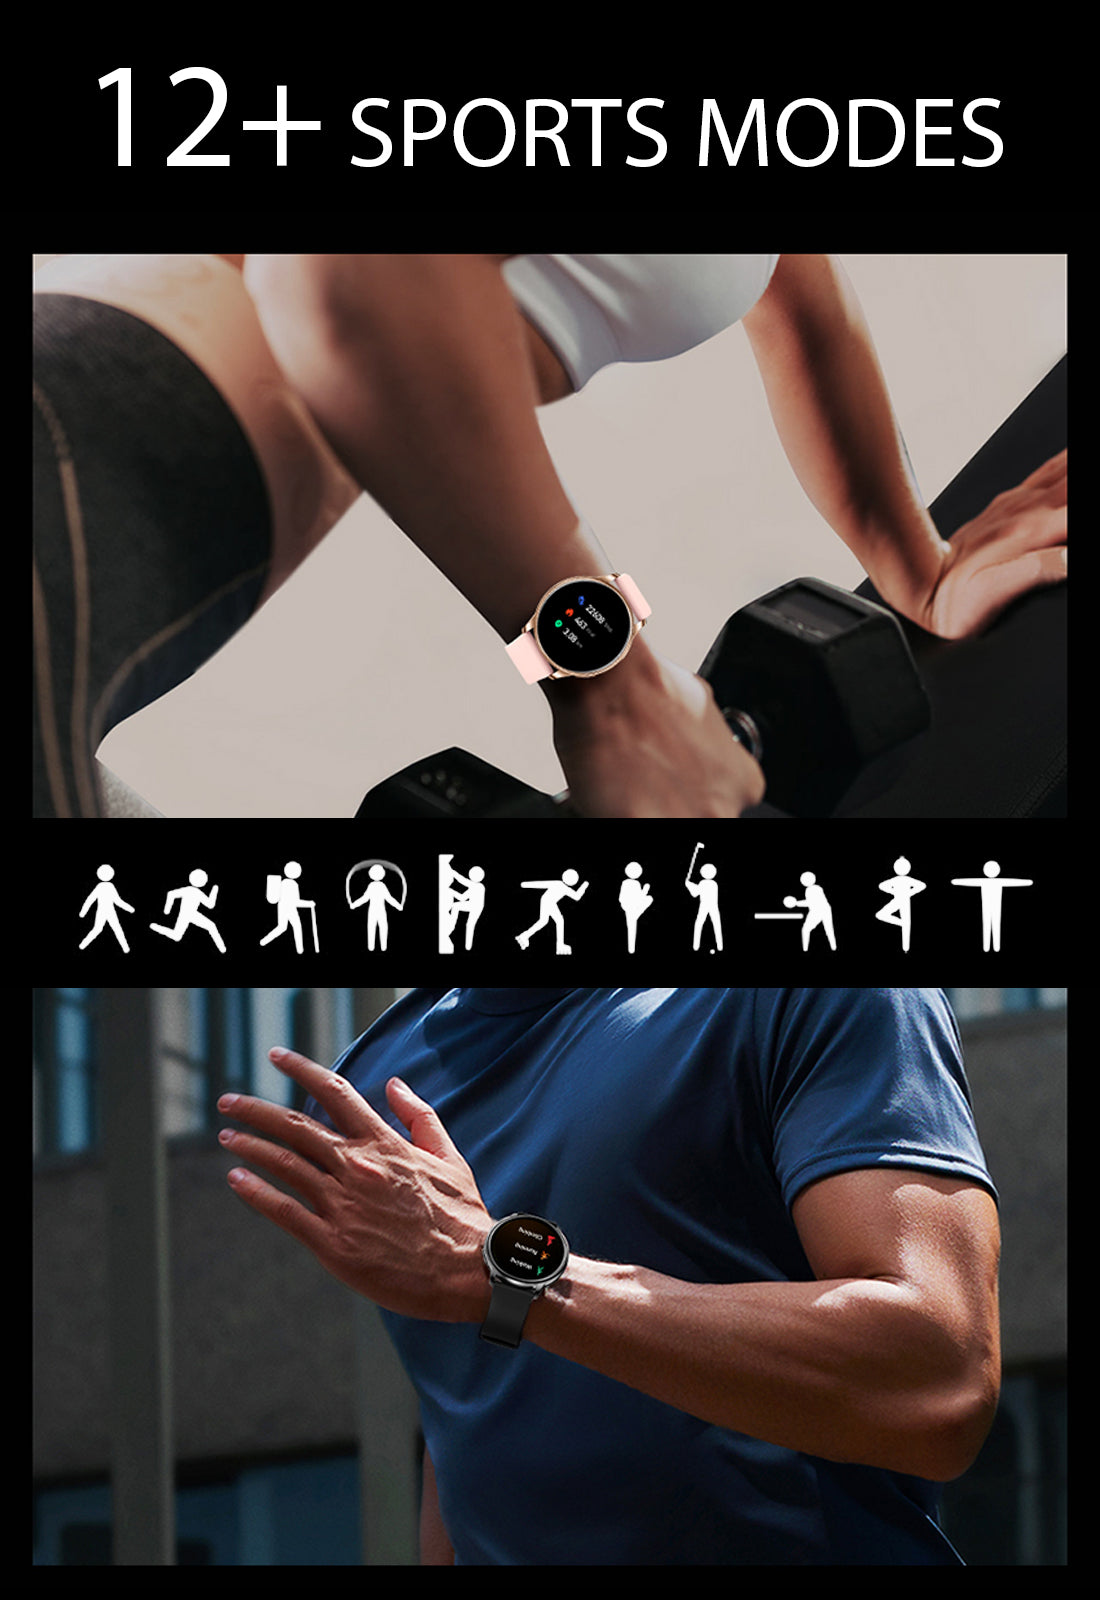 Smart Watch, Women Fitness Tracking Watch, Phone Incoming Call SMS  Notifications, Men Activity Tracking Smart Watches, Weather Forecasts,  Health